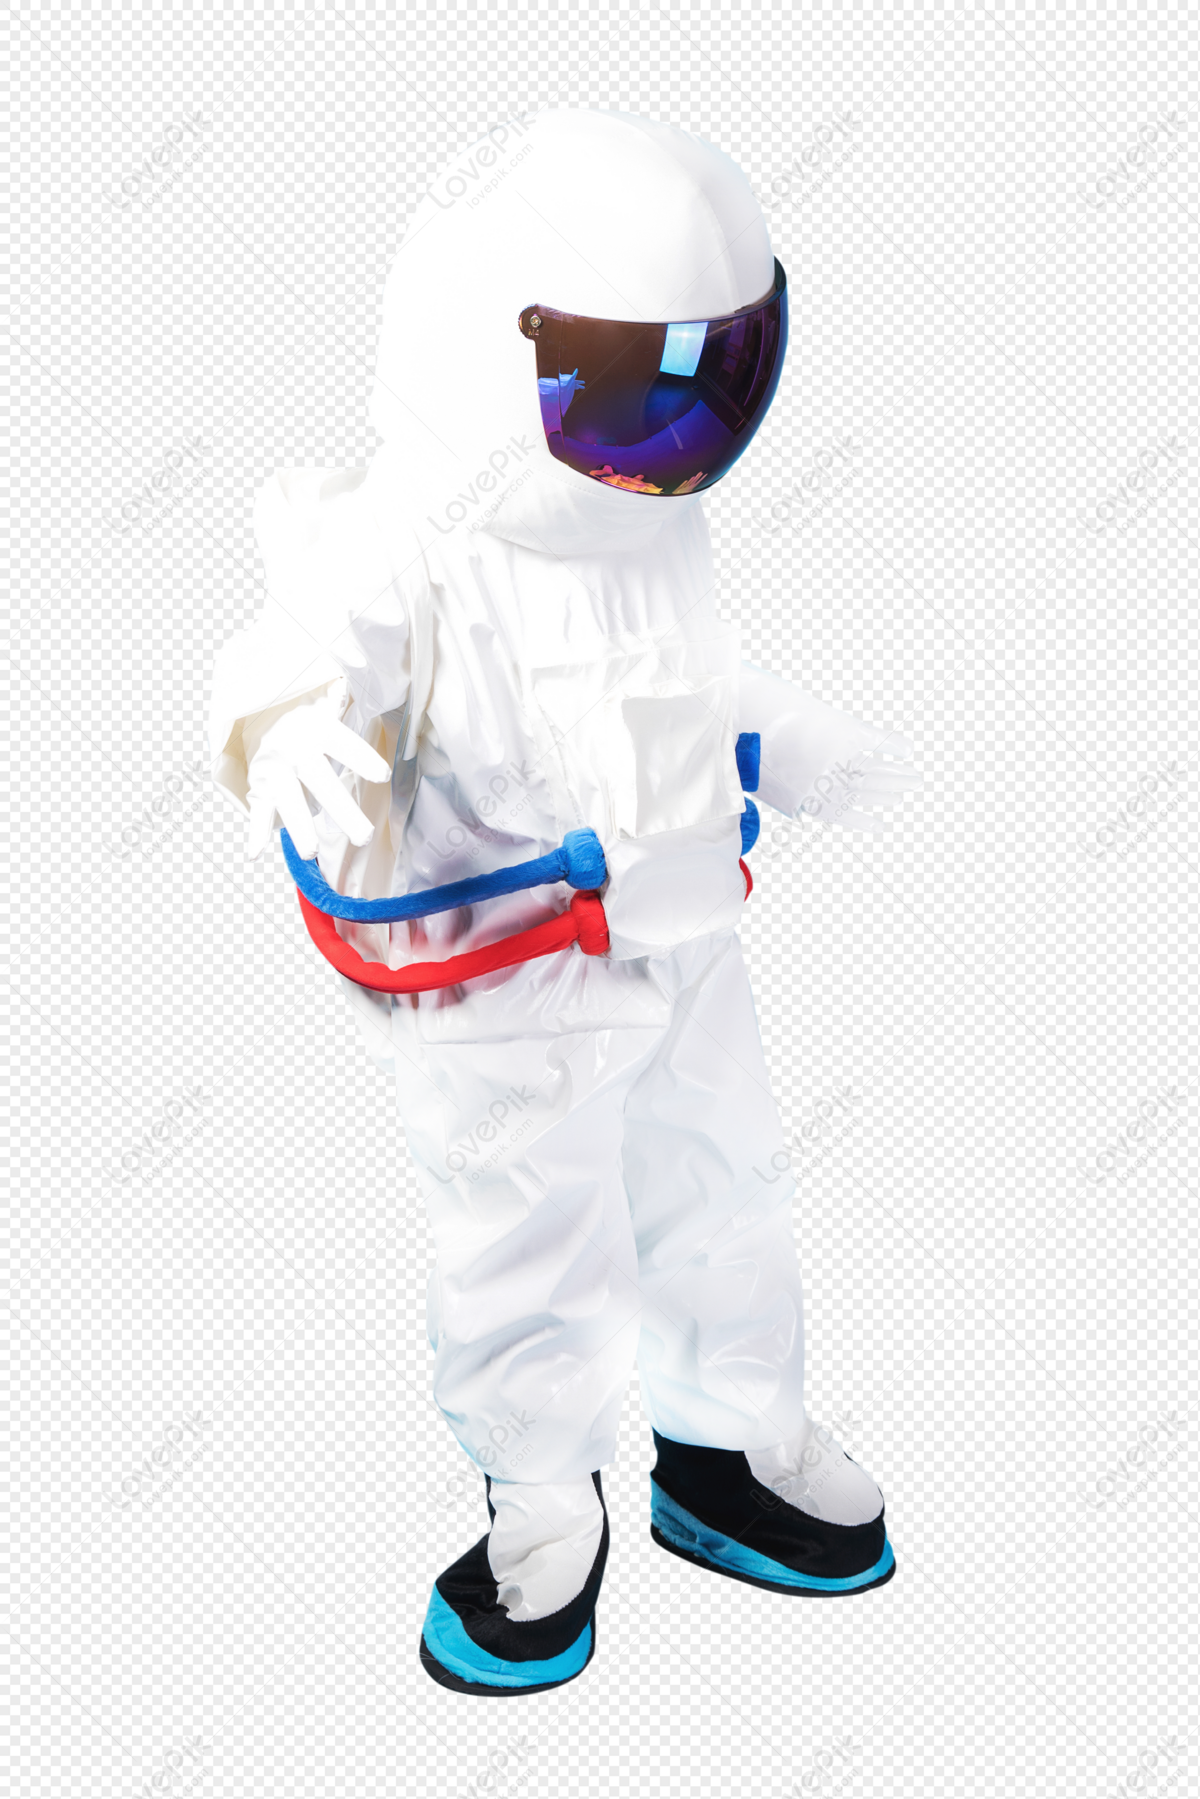 Children Wear Spacesuit PNG White Transparent And Clipart Image For ...